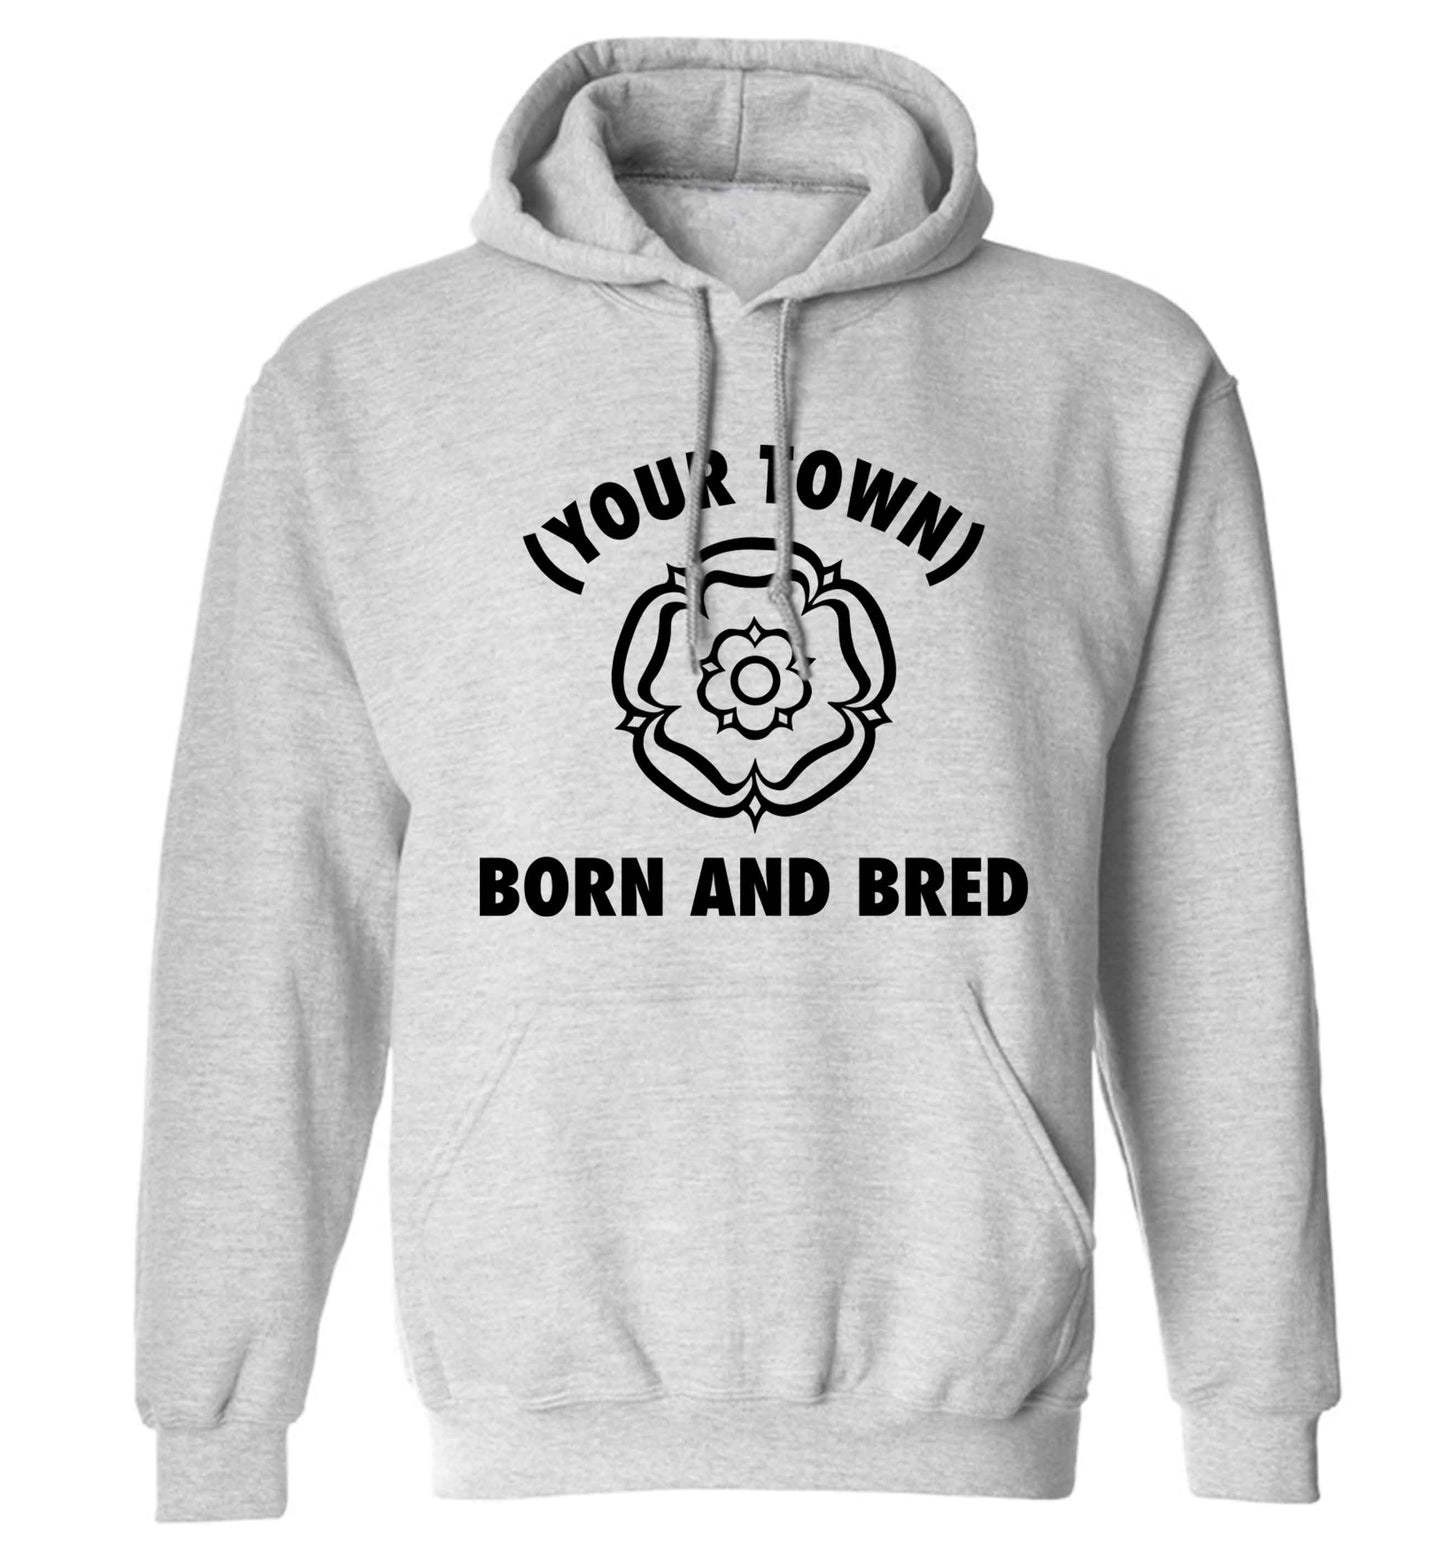 Personalised born and bred adults unisex grey hoodie 2XL